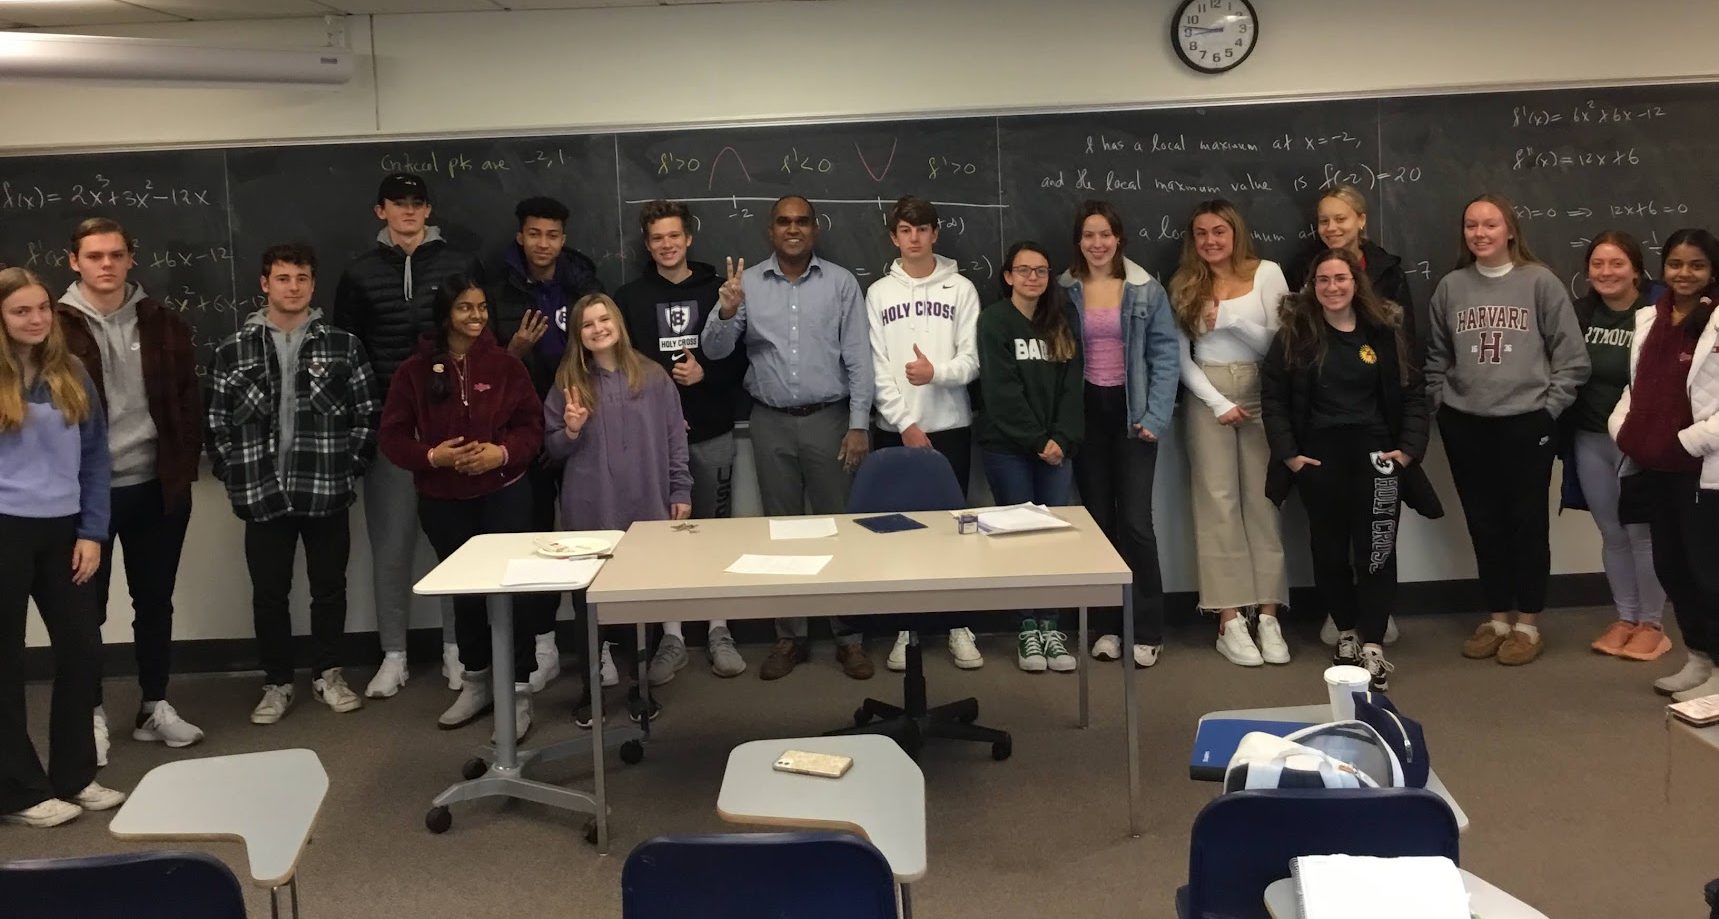 a group of students with their professor stands in front of a black chalkboard, covered in mathematical terms. All of the students are smiling, and some are holding up peace signs.